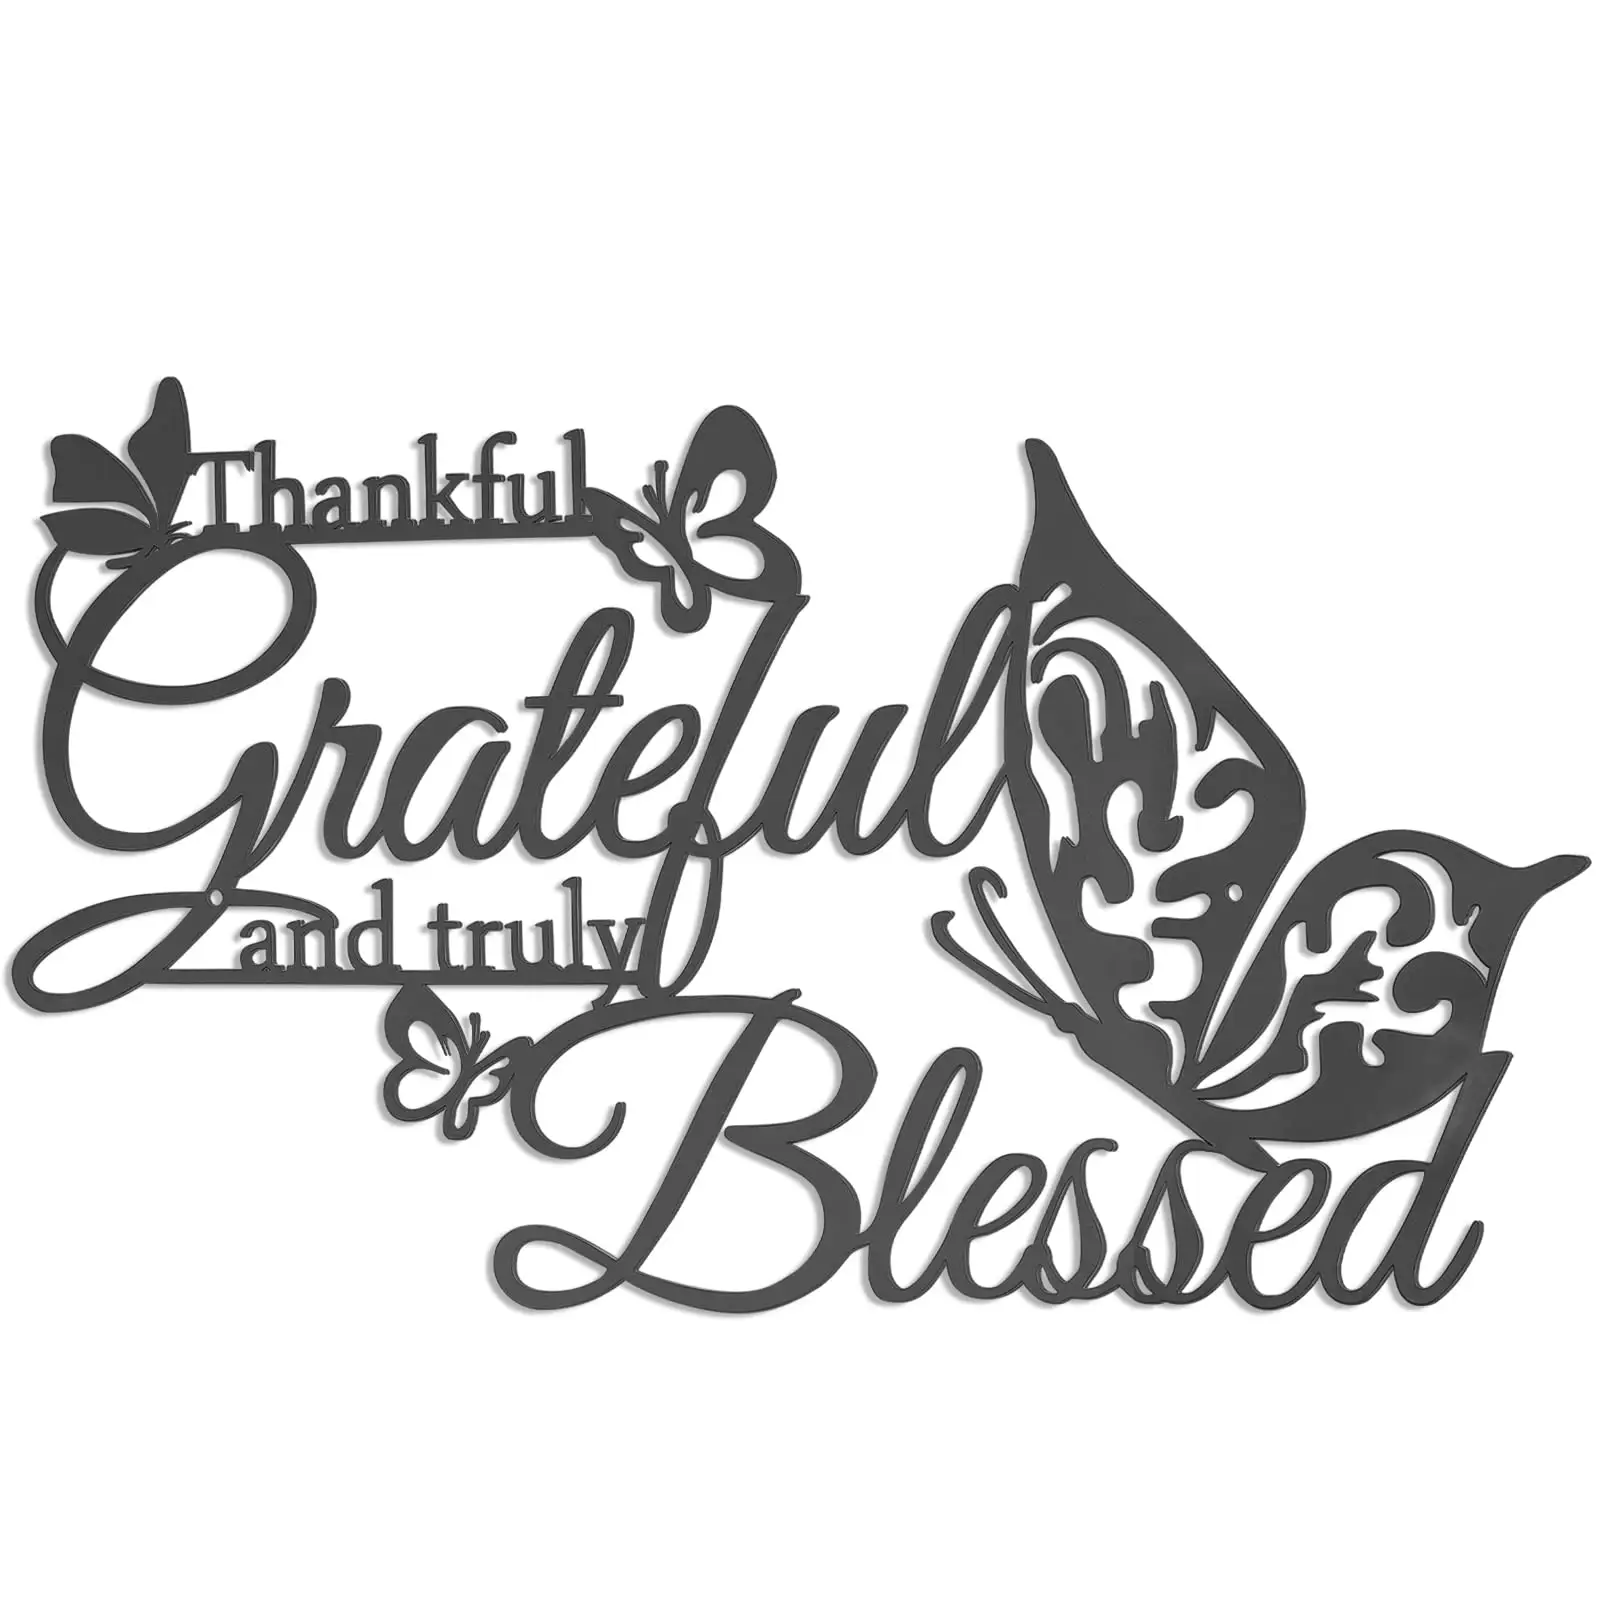 Thankful Grateful and Truly Blessed Art Word Wall Sign Decor, Black Metal Hanging Wall Home Decoration with Butterflies